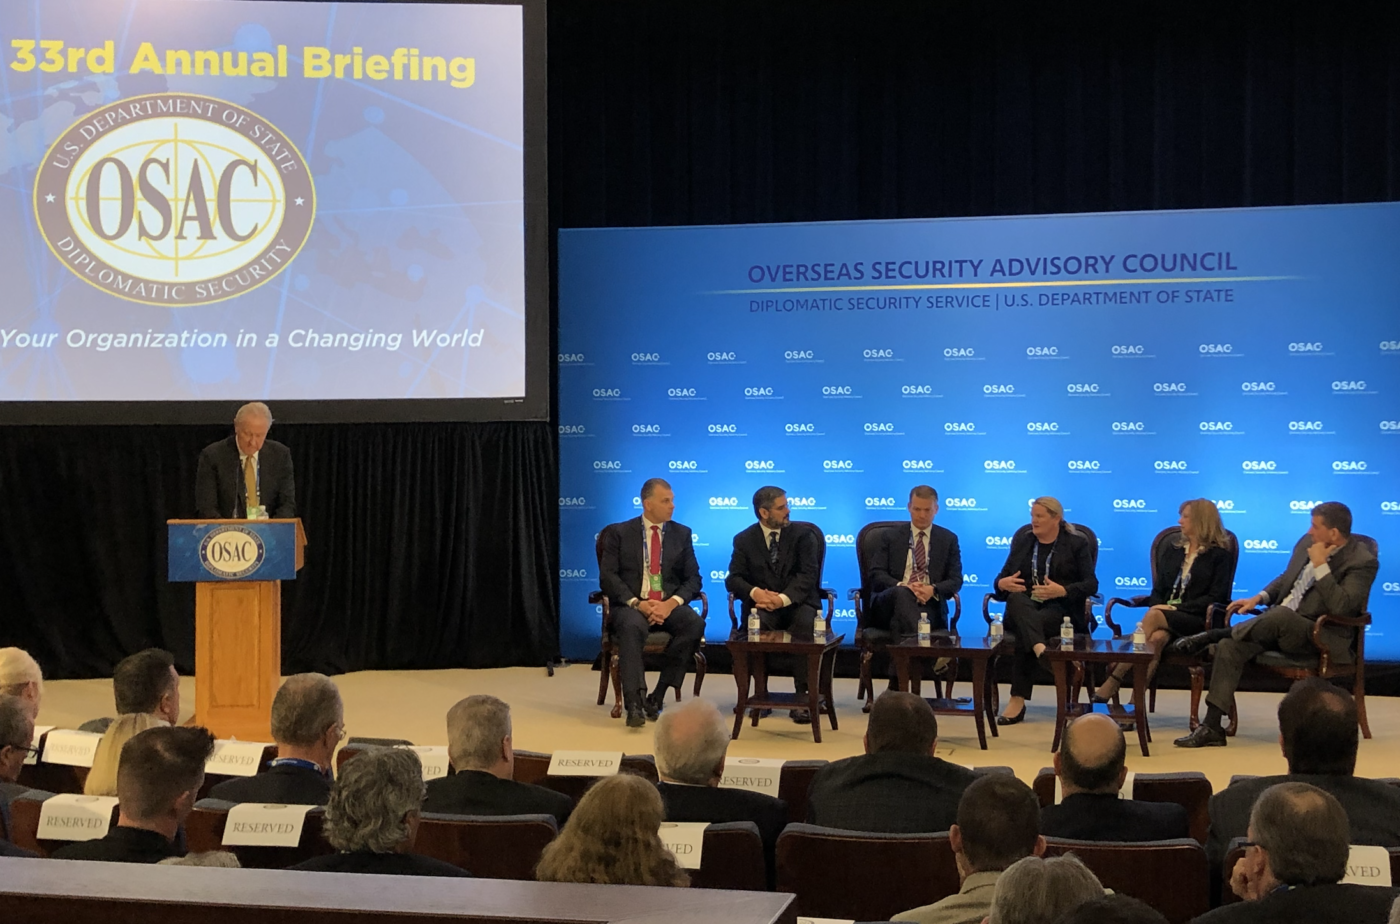 A panel at OSAC. Six people in suits talk animatedly on a stage with a backdrop that reads "Overseas Security Advisory Council." A moderator stands at a podium to the left under a screen with "33rd Annual Briefing - OSAC - Your organization in a changing world" projected onto it.